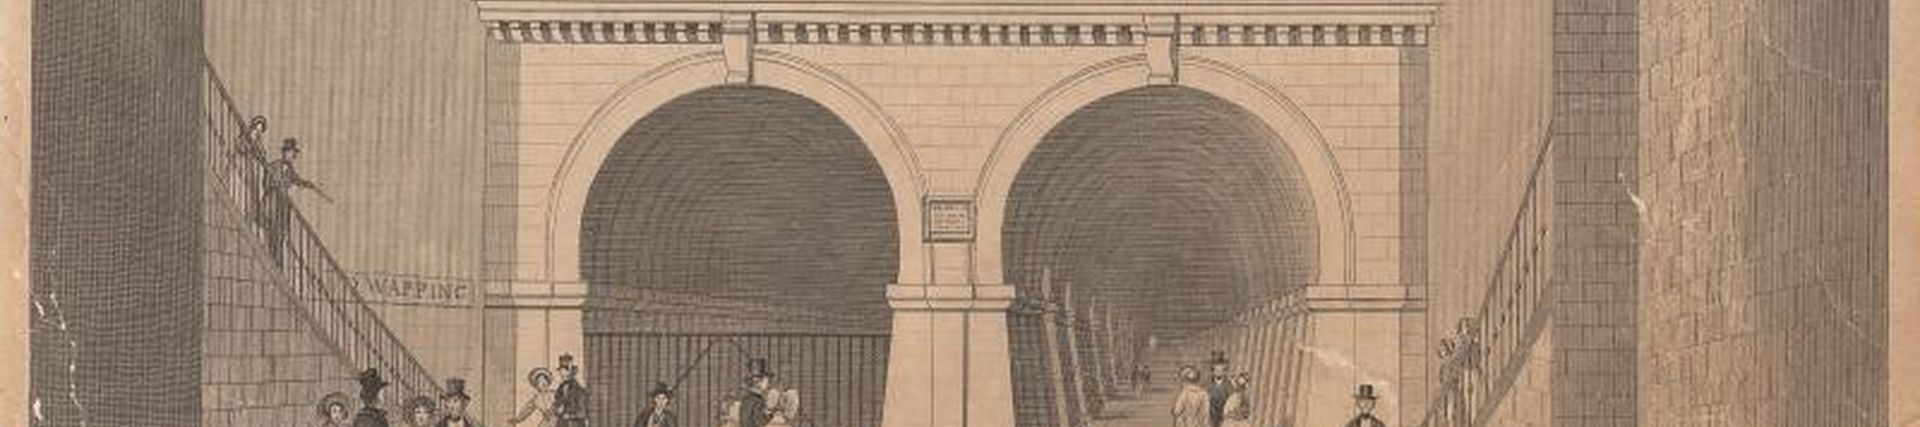 Drawing of the Thames Tunnel showing the two entrances and pedestrians walking through